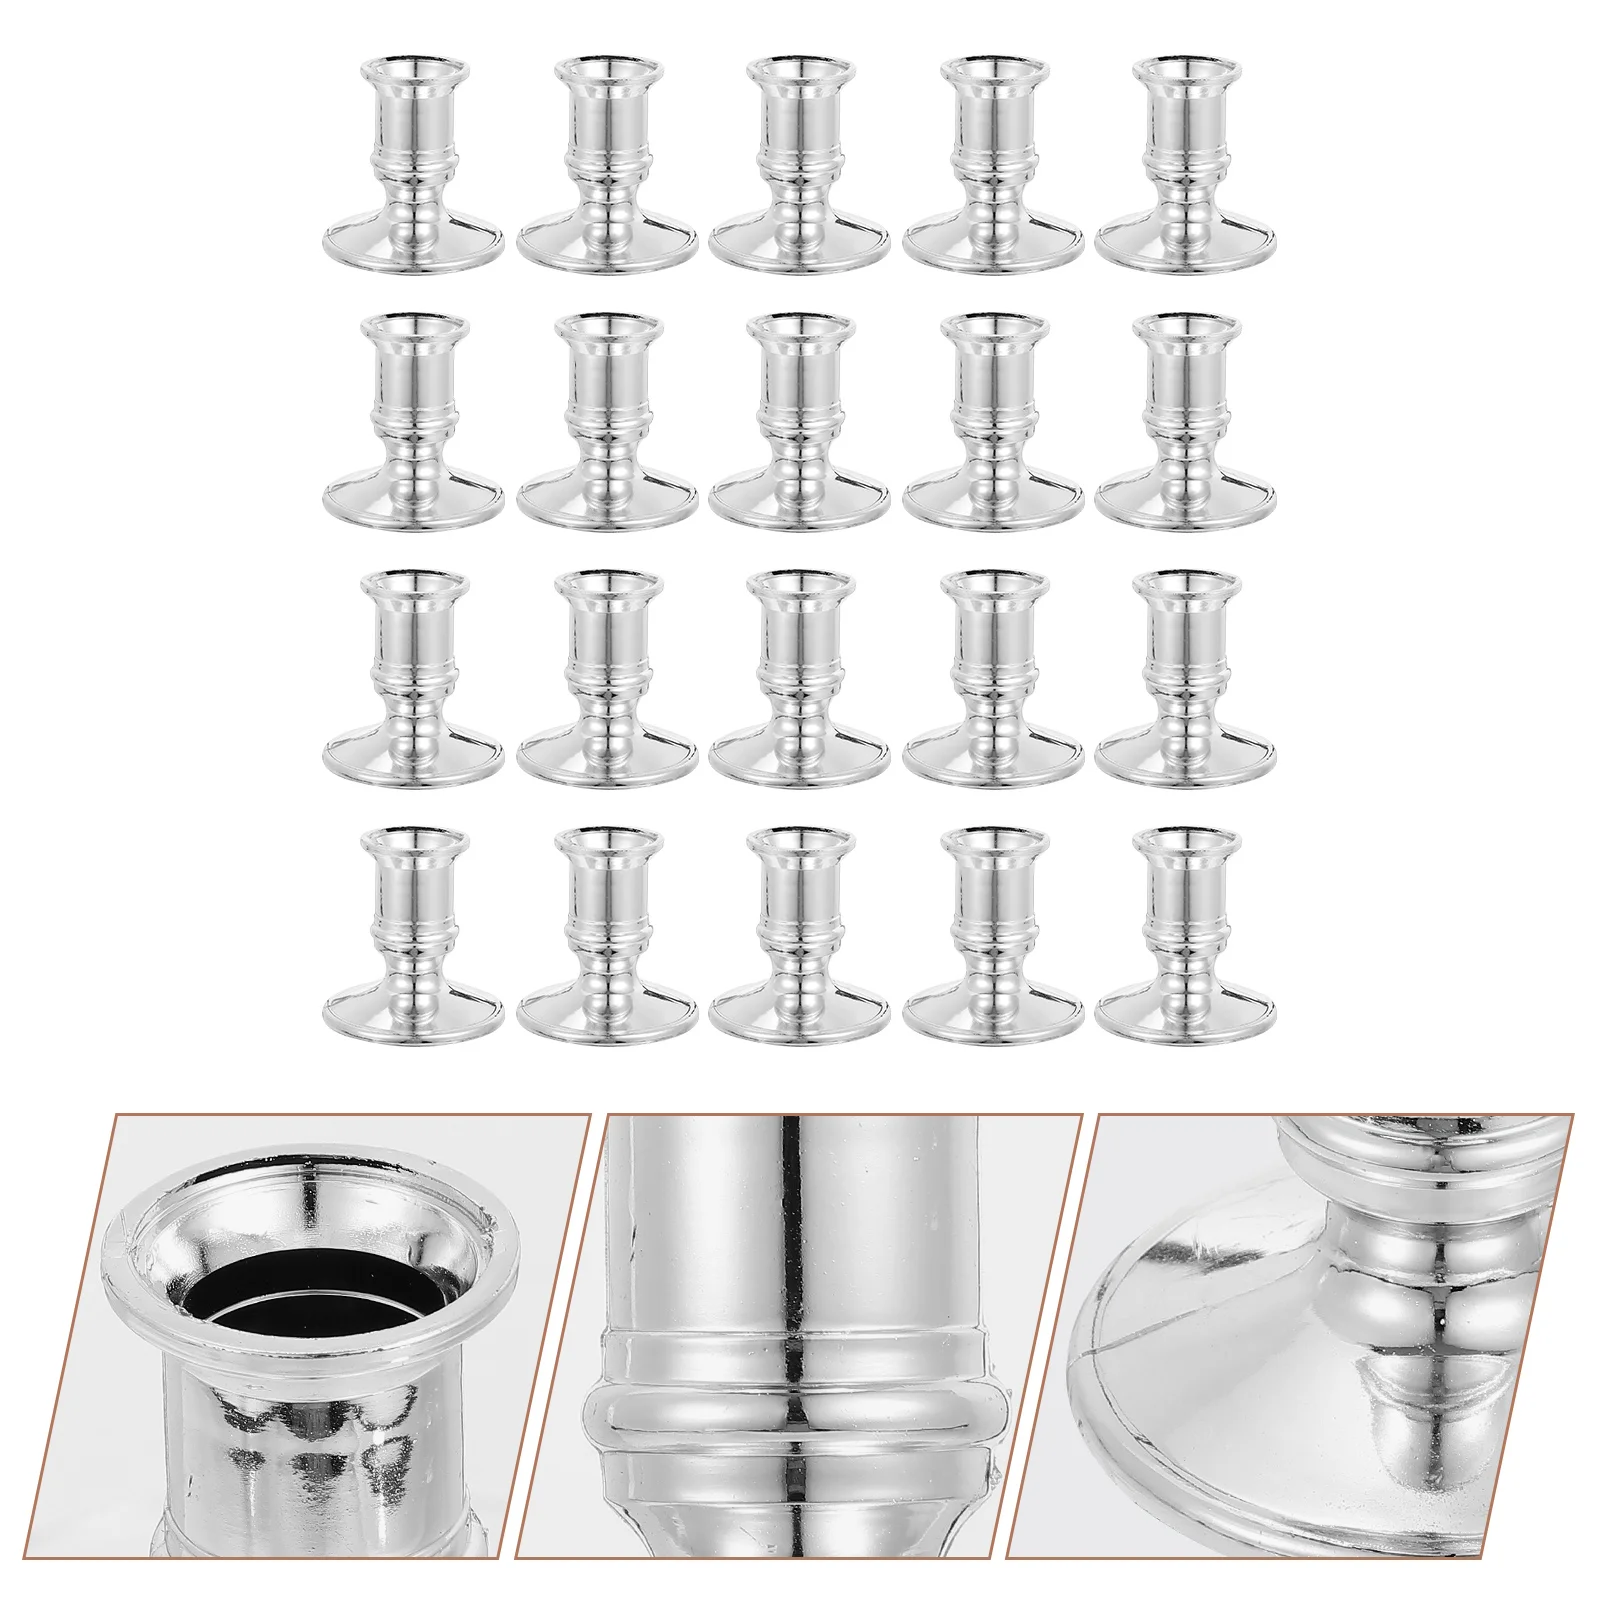 

20Pcs Bases Candlestick Stand Electronic Holder Stand Tall Holders Pillar Candelabra